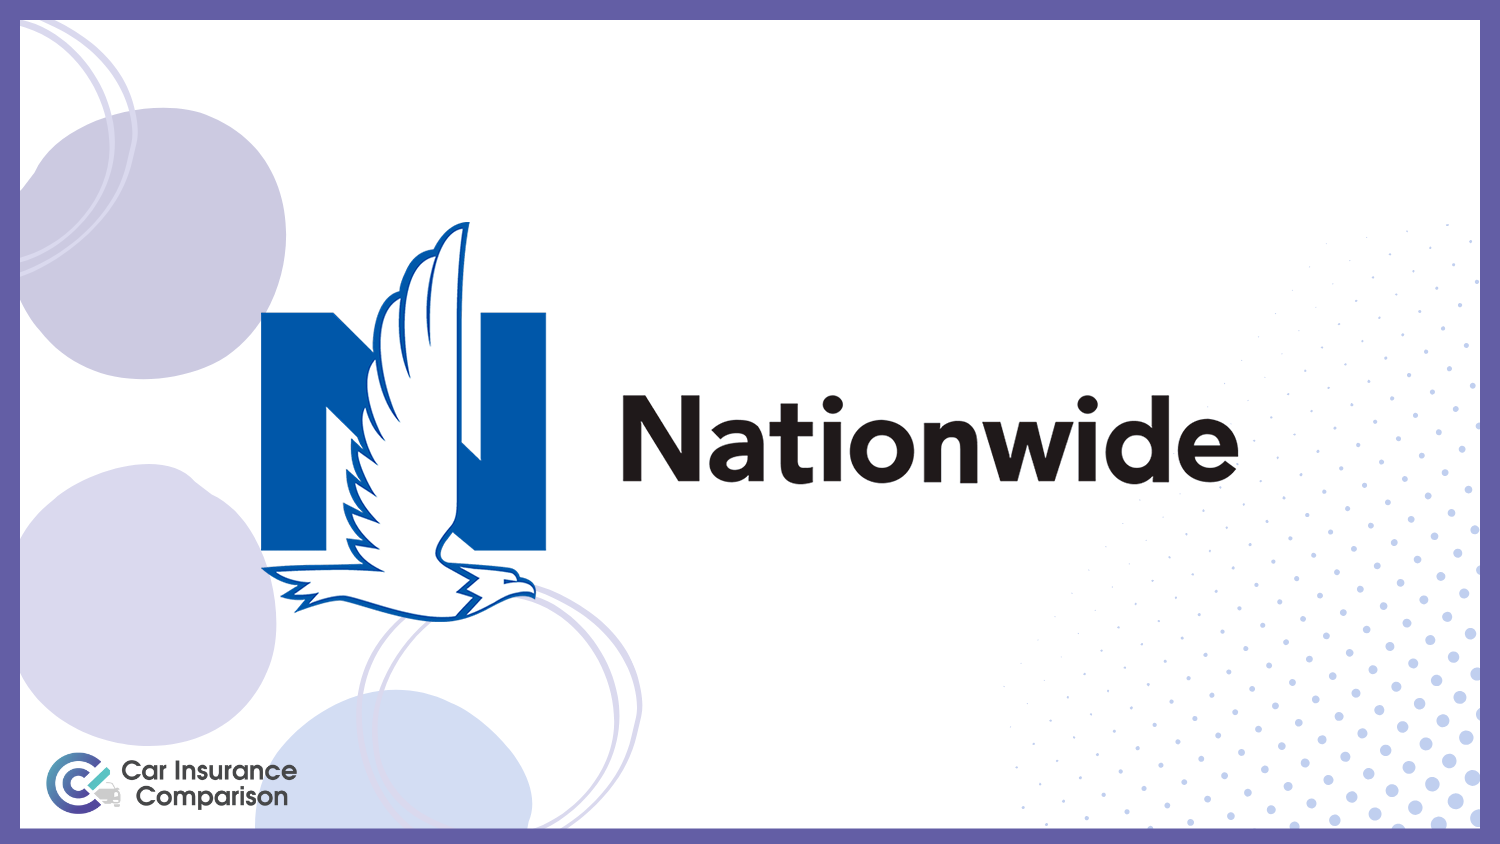 Nationwide: Best Car Insurance for Real Estate Agents